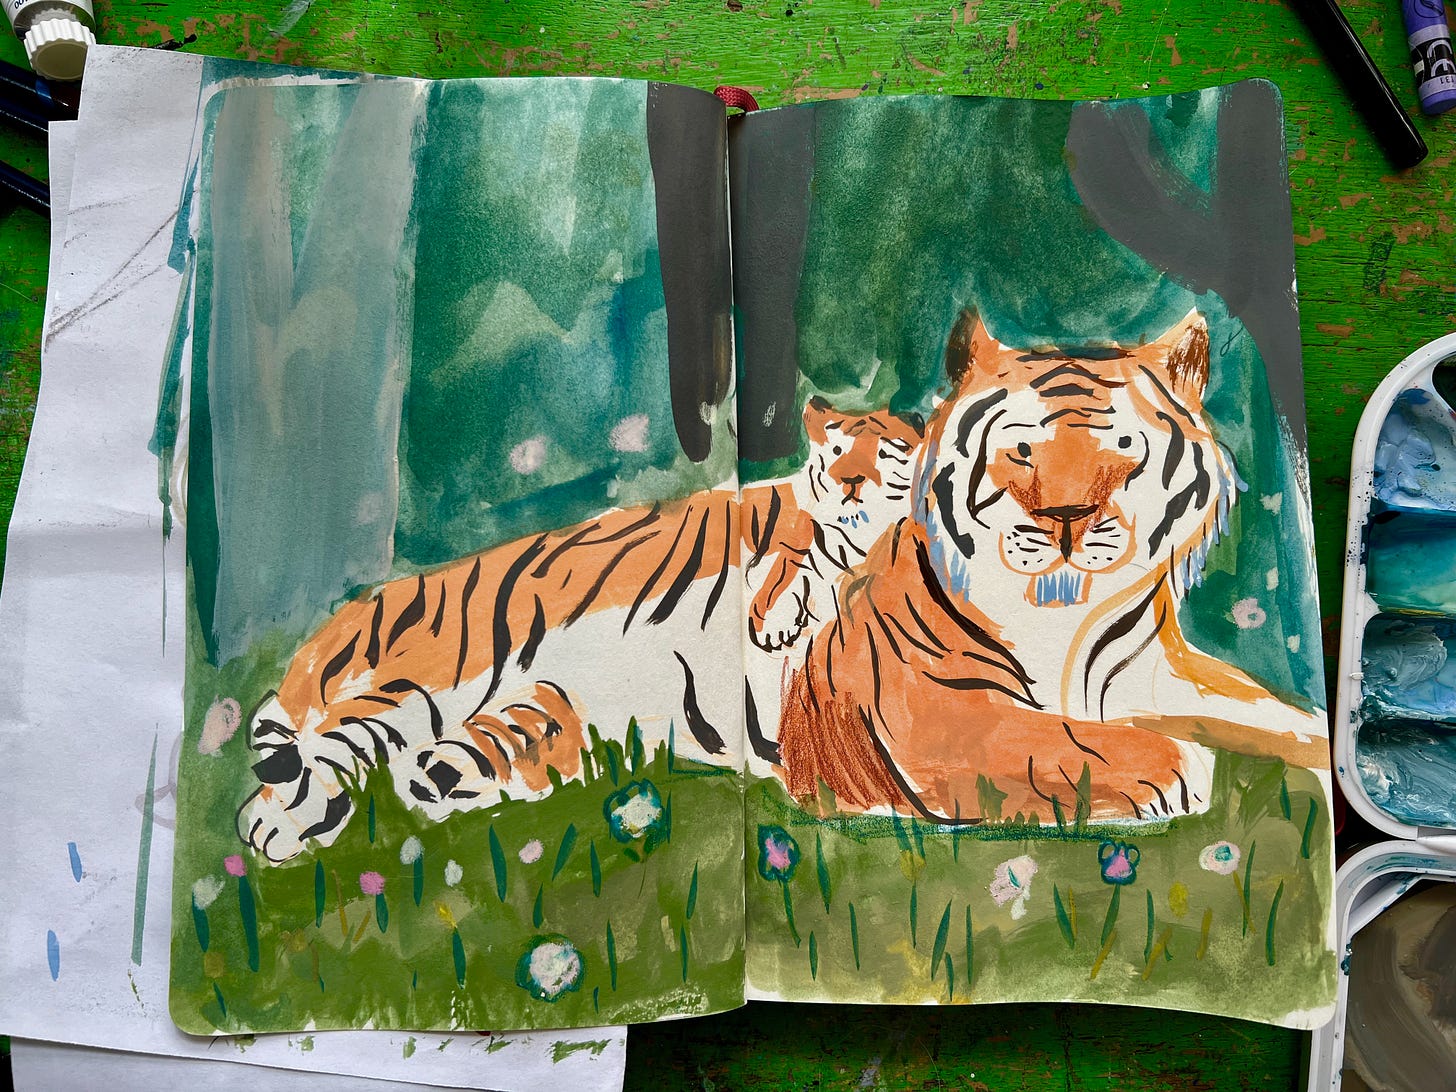 sketchbook with tiger and cub illustration by Beth Spencer